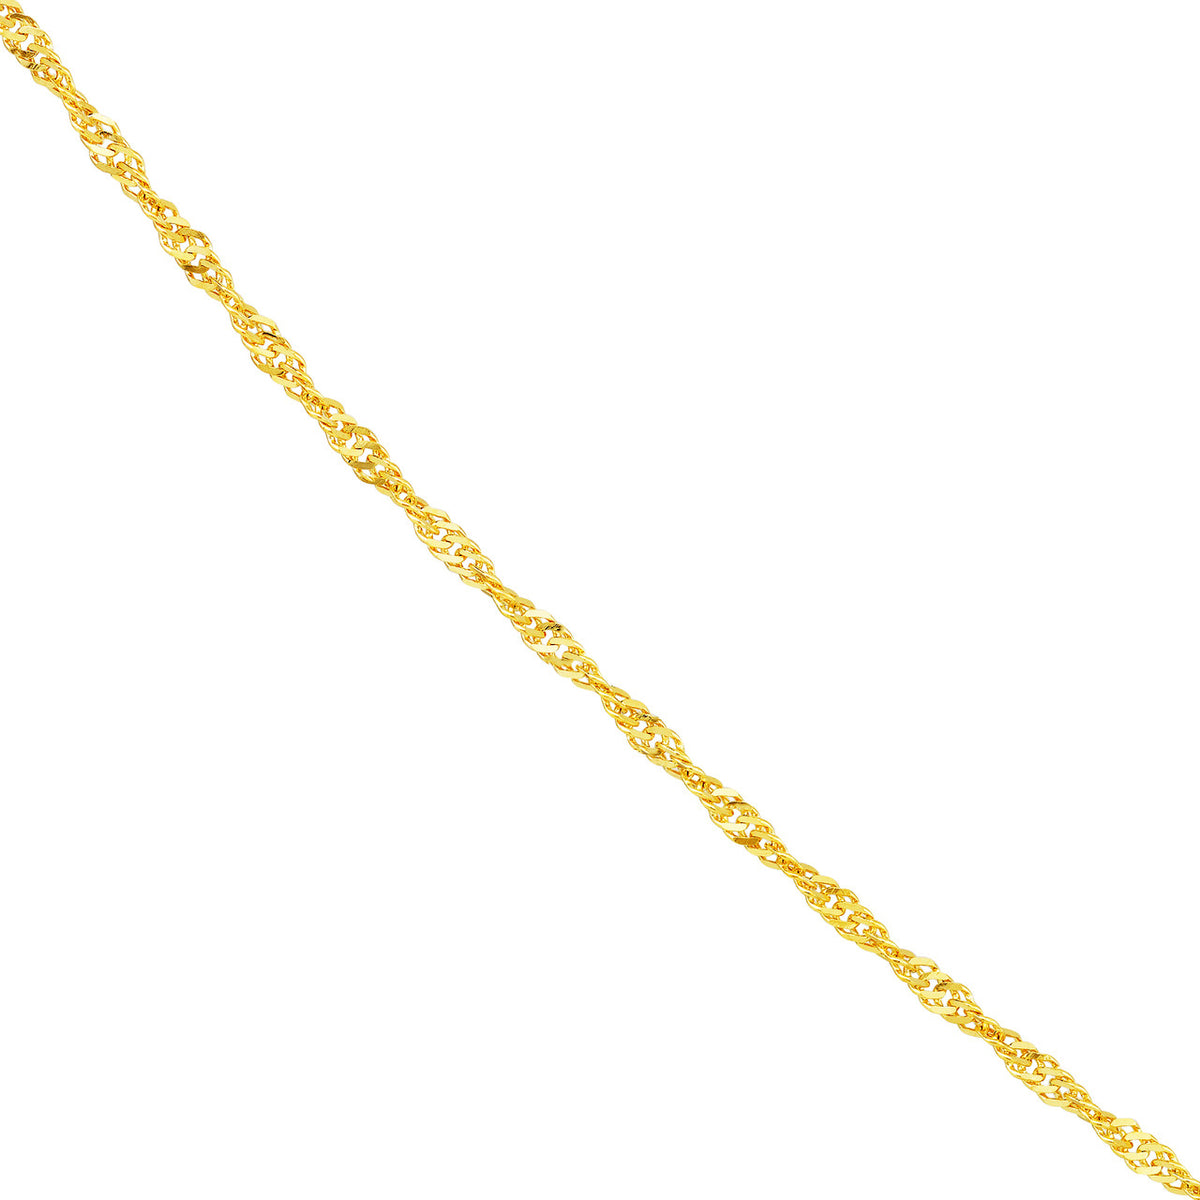 14K Yellow Gold or White Gold 1.7mm Singapore Chain Necklace with Lobster Lock